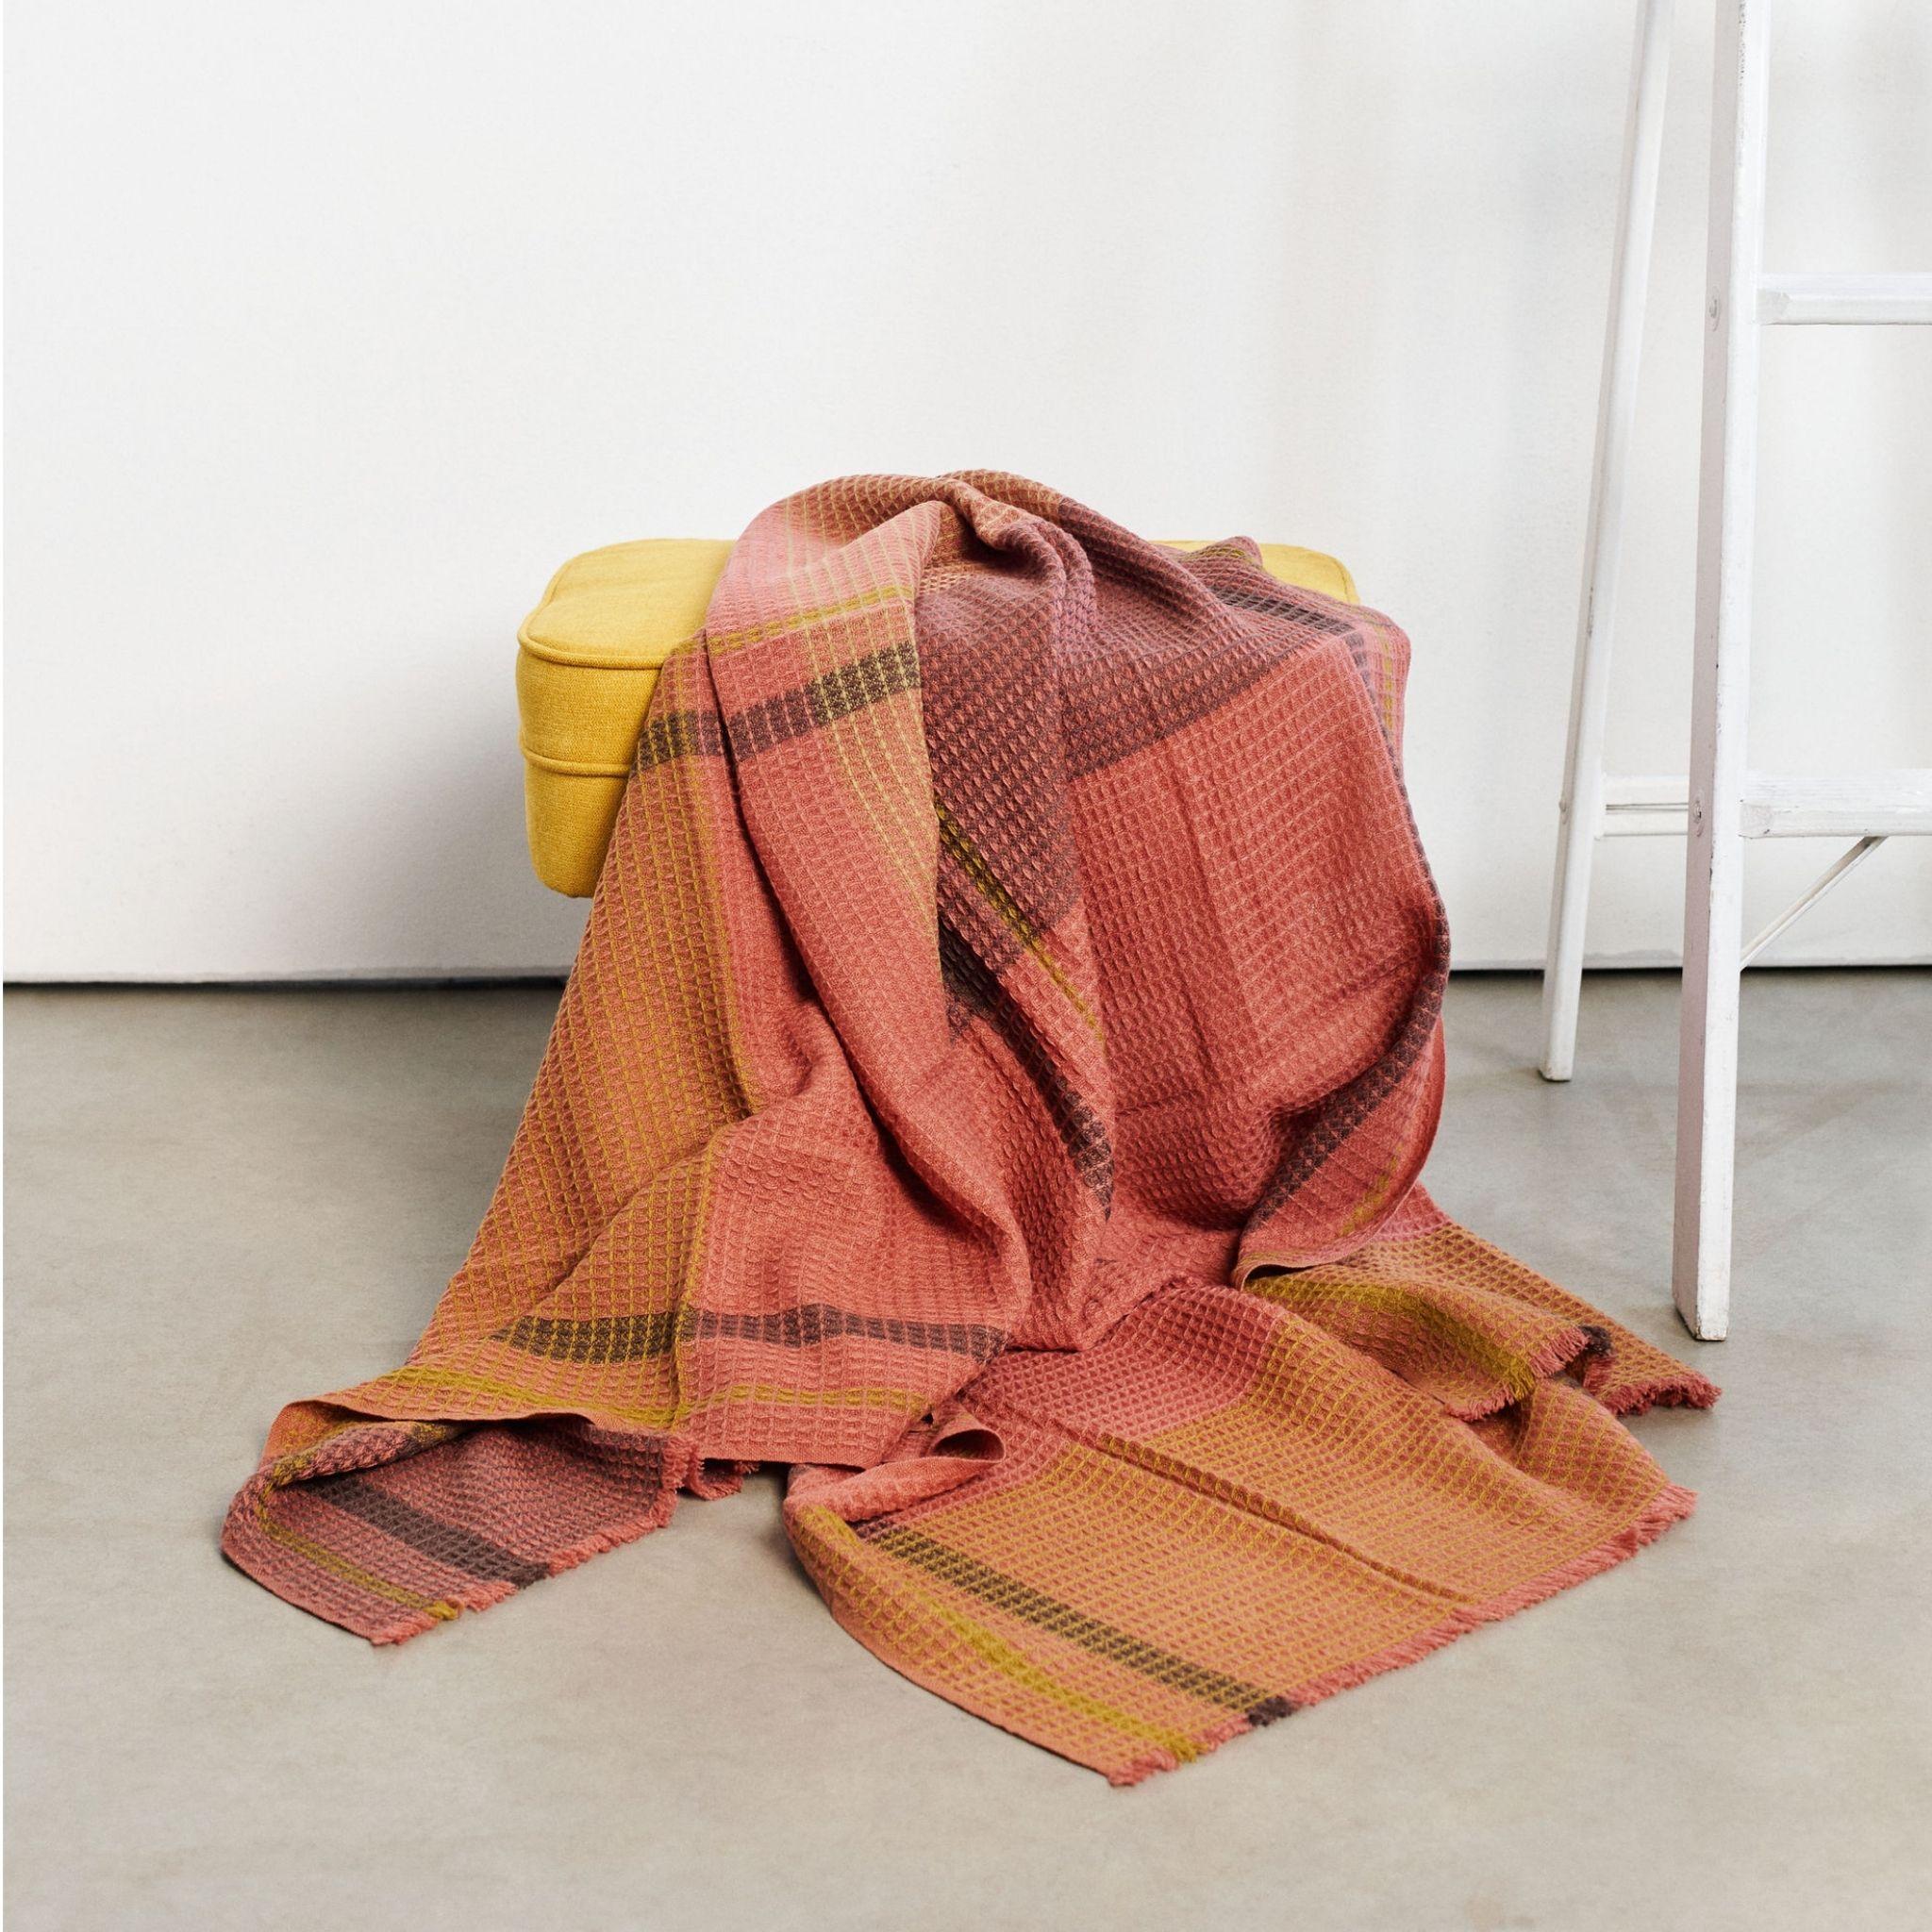 Cocoon is a meticulous handwoven throw in waffle weave pattern by artisans in Nepal. The design of this serene throw with a earthy pop of color ,  is made up of subtle textured checks pattern in waffle weave.Edges of this throw are short and neat